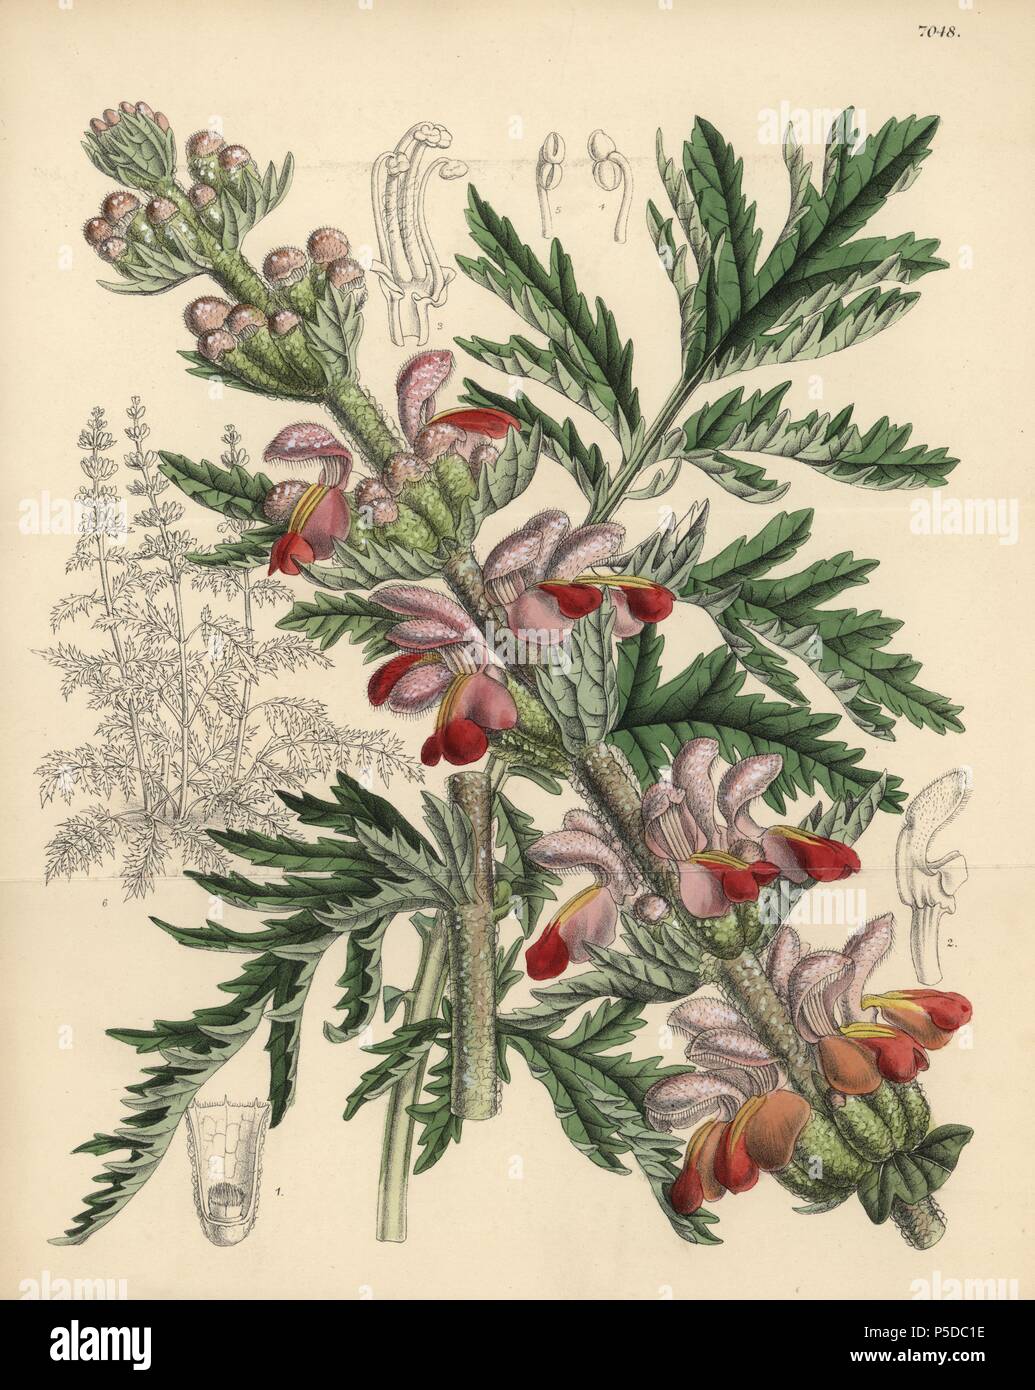 Eremostachys laciniata, native to western Asia. Hand-coloured botanical illustration drawn by Matilda Smith and lithographed by J.N. Fitch from Joseph Dalton Hooker's 'Curtis's Botanical Magazine,' 1889, L. Reeve & Co. A second-cousin and pupil of Sir Joseph Dalton Hooker, Matilda Smith (1854-1926) was the main artist for the Botanical Magazine from 1887 until 1920 and contributed 2,300 illustrations. Stock Photo